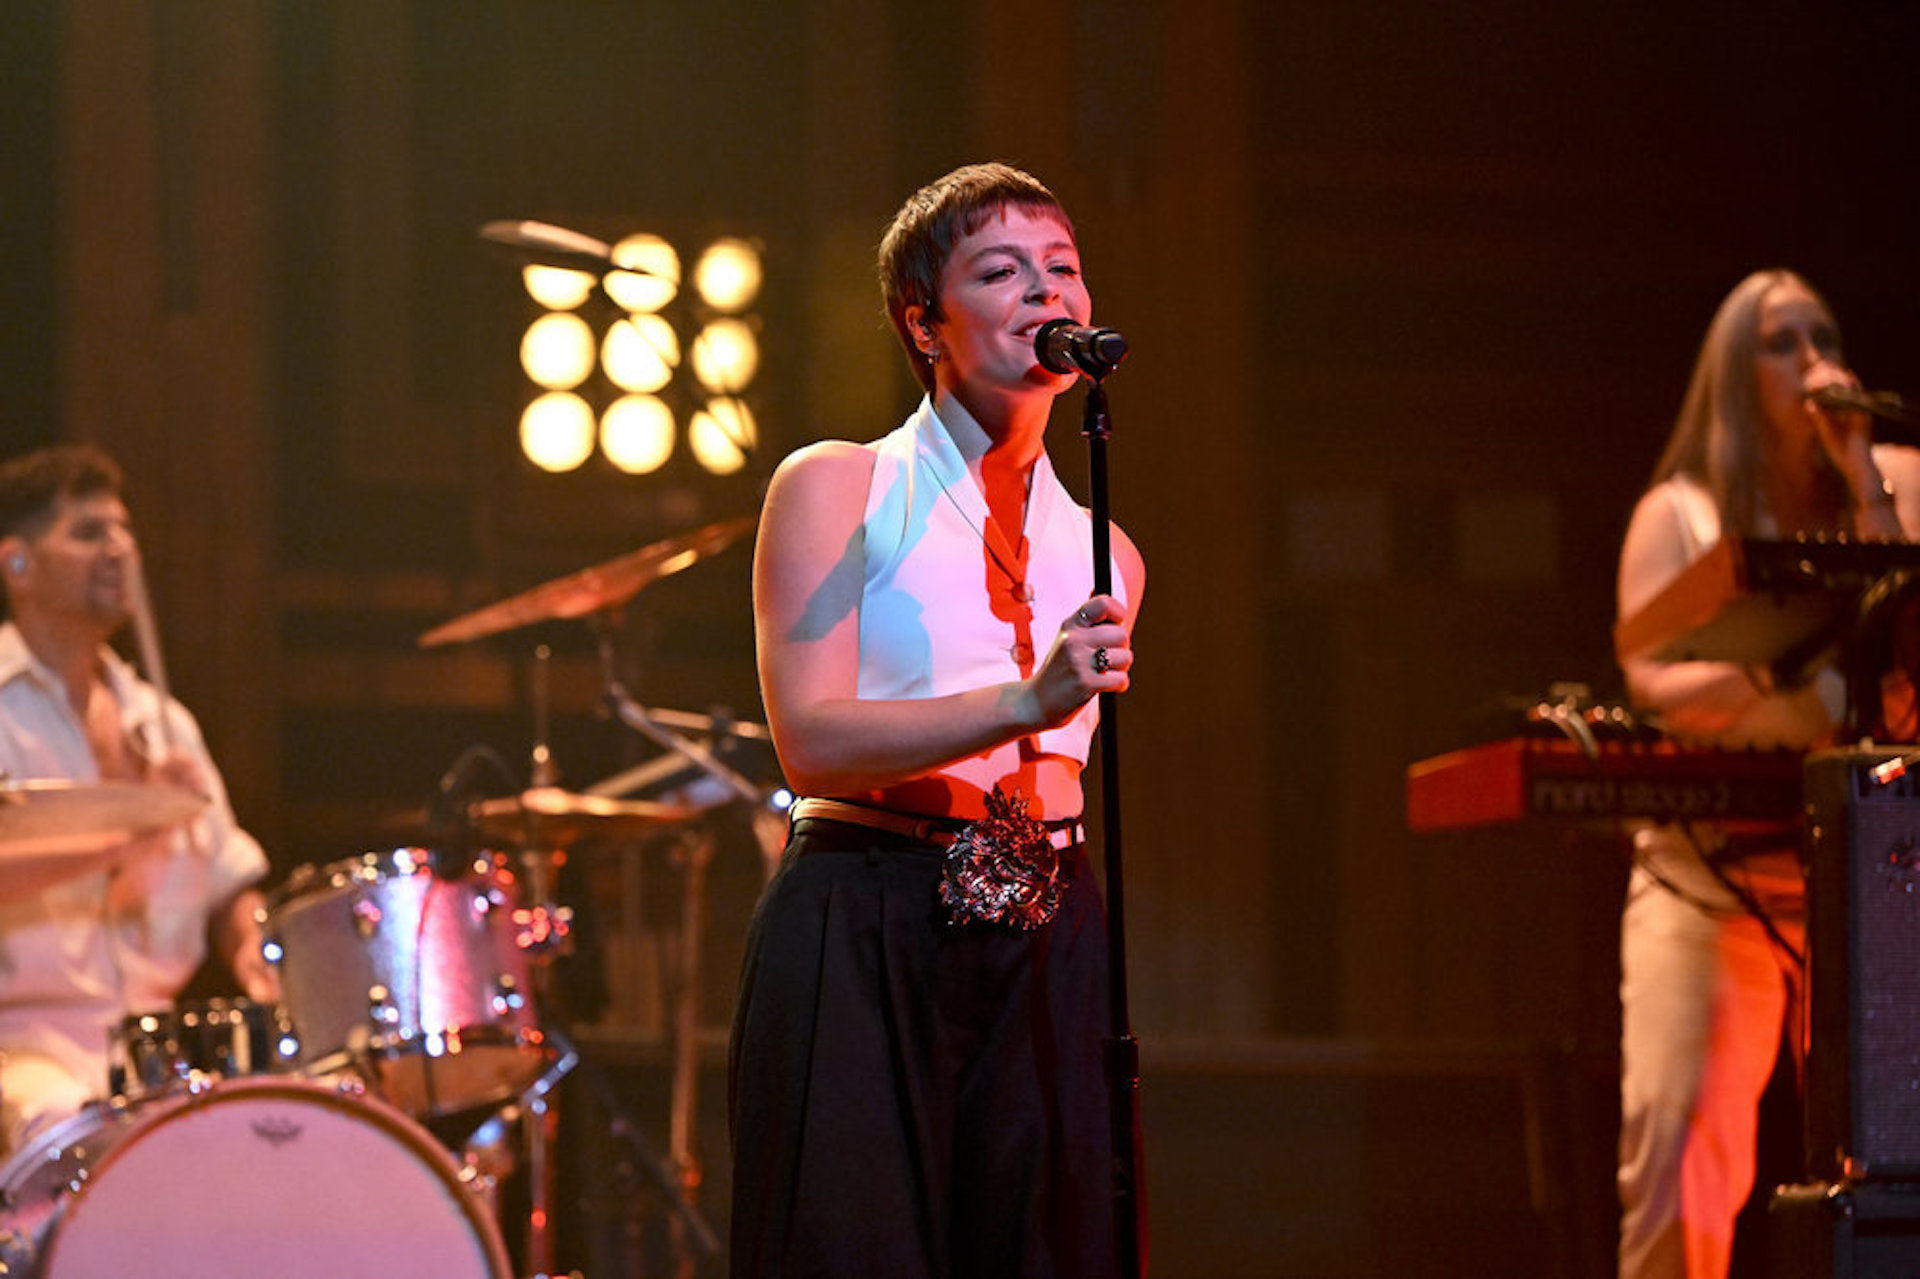 Maggie Rogers electrified audiences with her return to Radio City Music Hall on Wednesday, February 15. The 